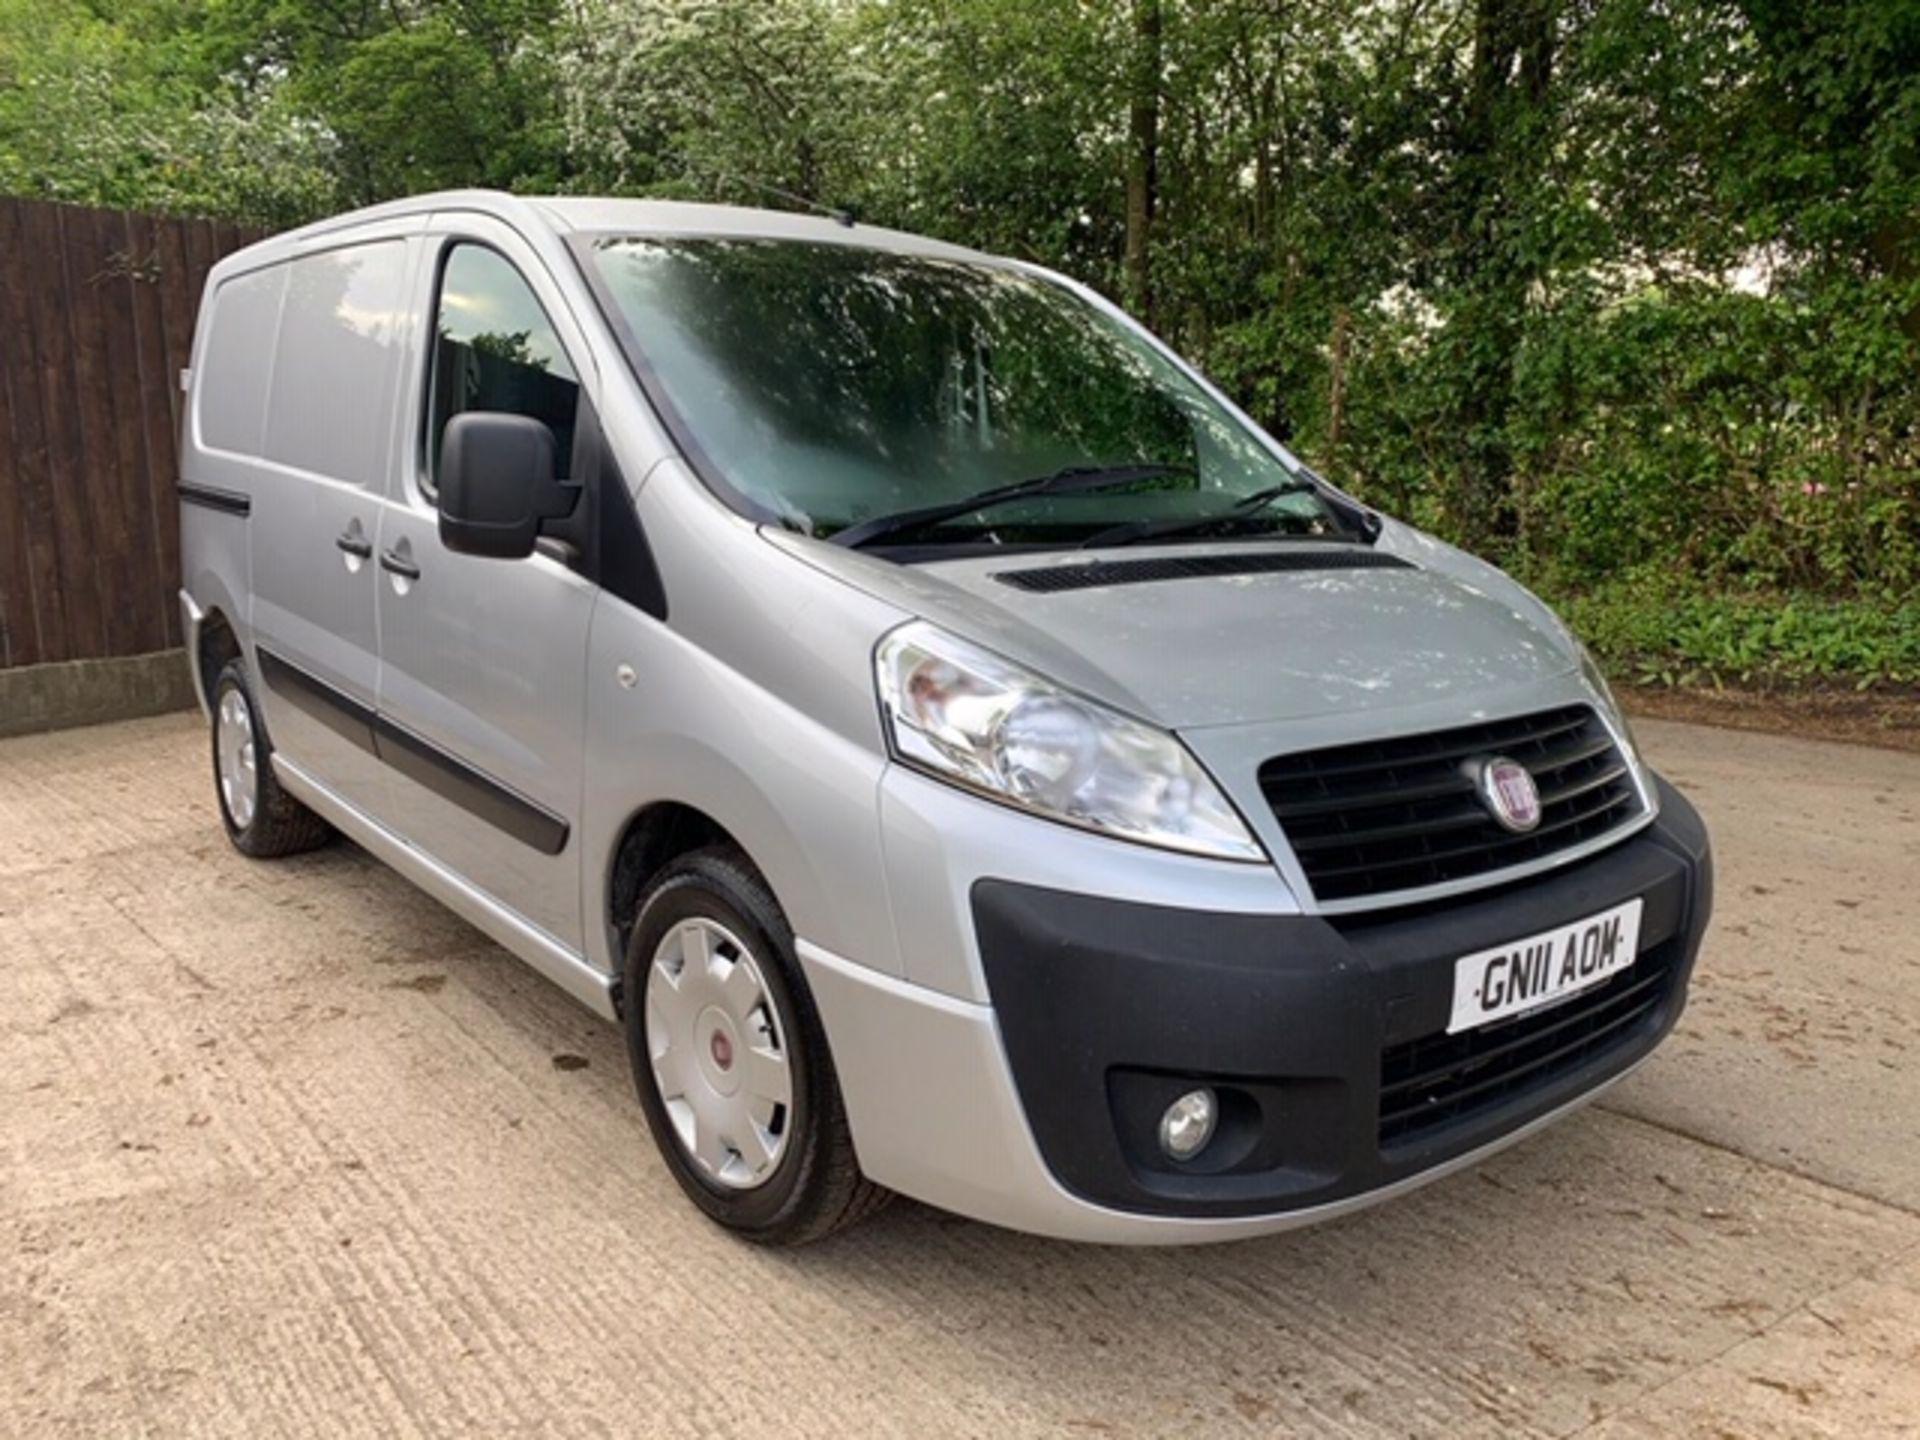 FIAT SCUDO PANEL VAN. YEAR 2011 1.6HDI ENGINE SOLD WITH A FULL MOT WITH V5 TWIN SIDE LOADING